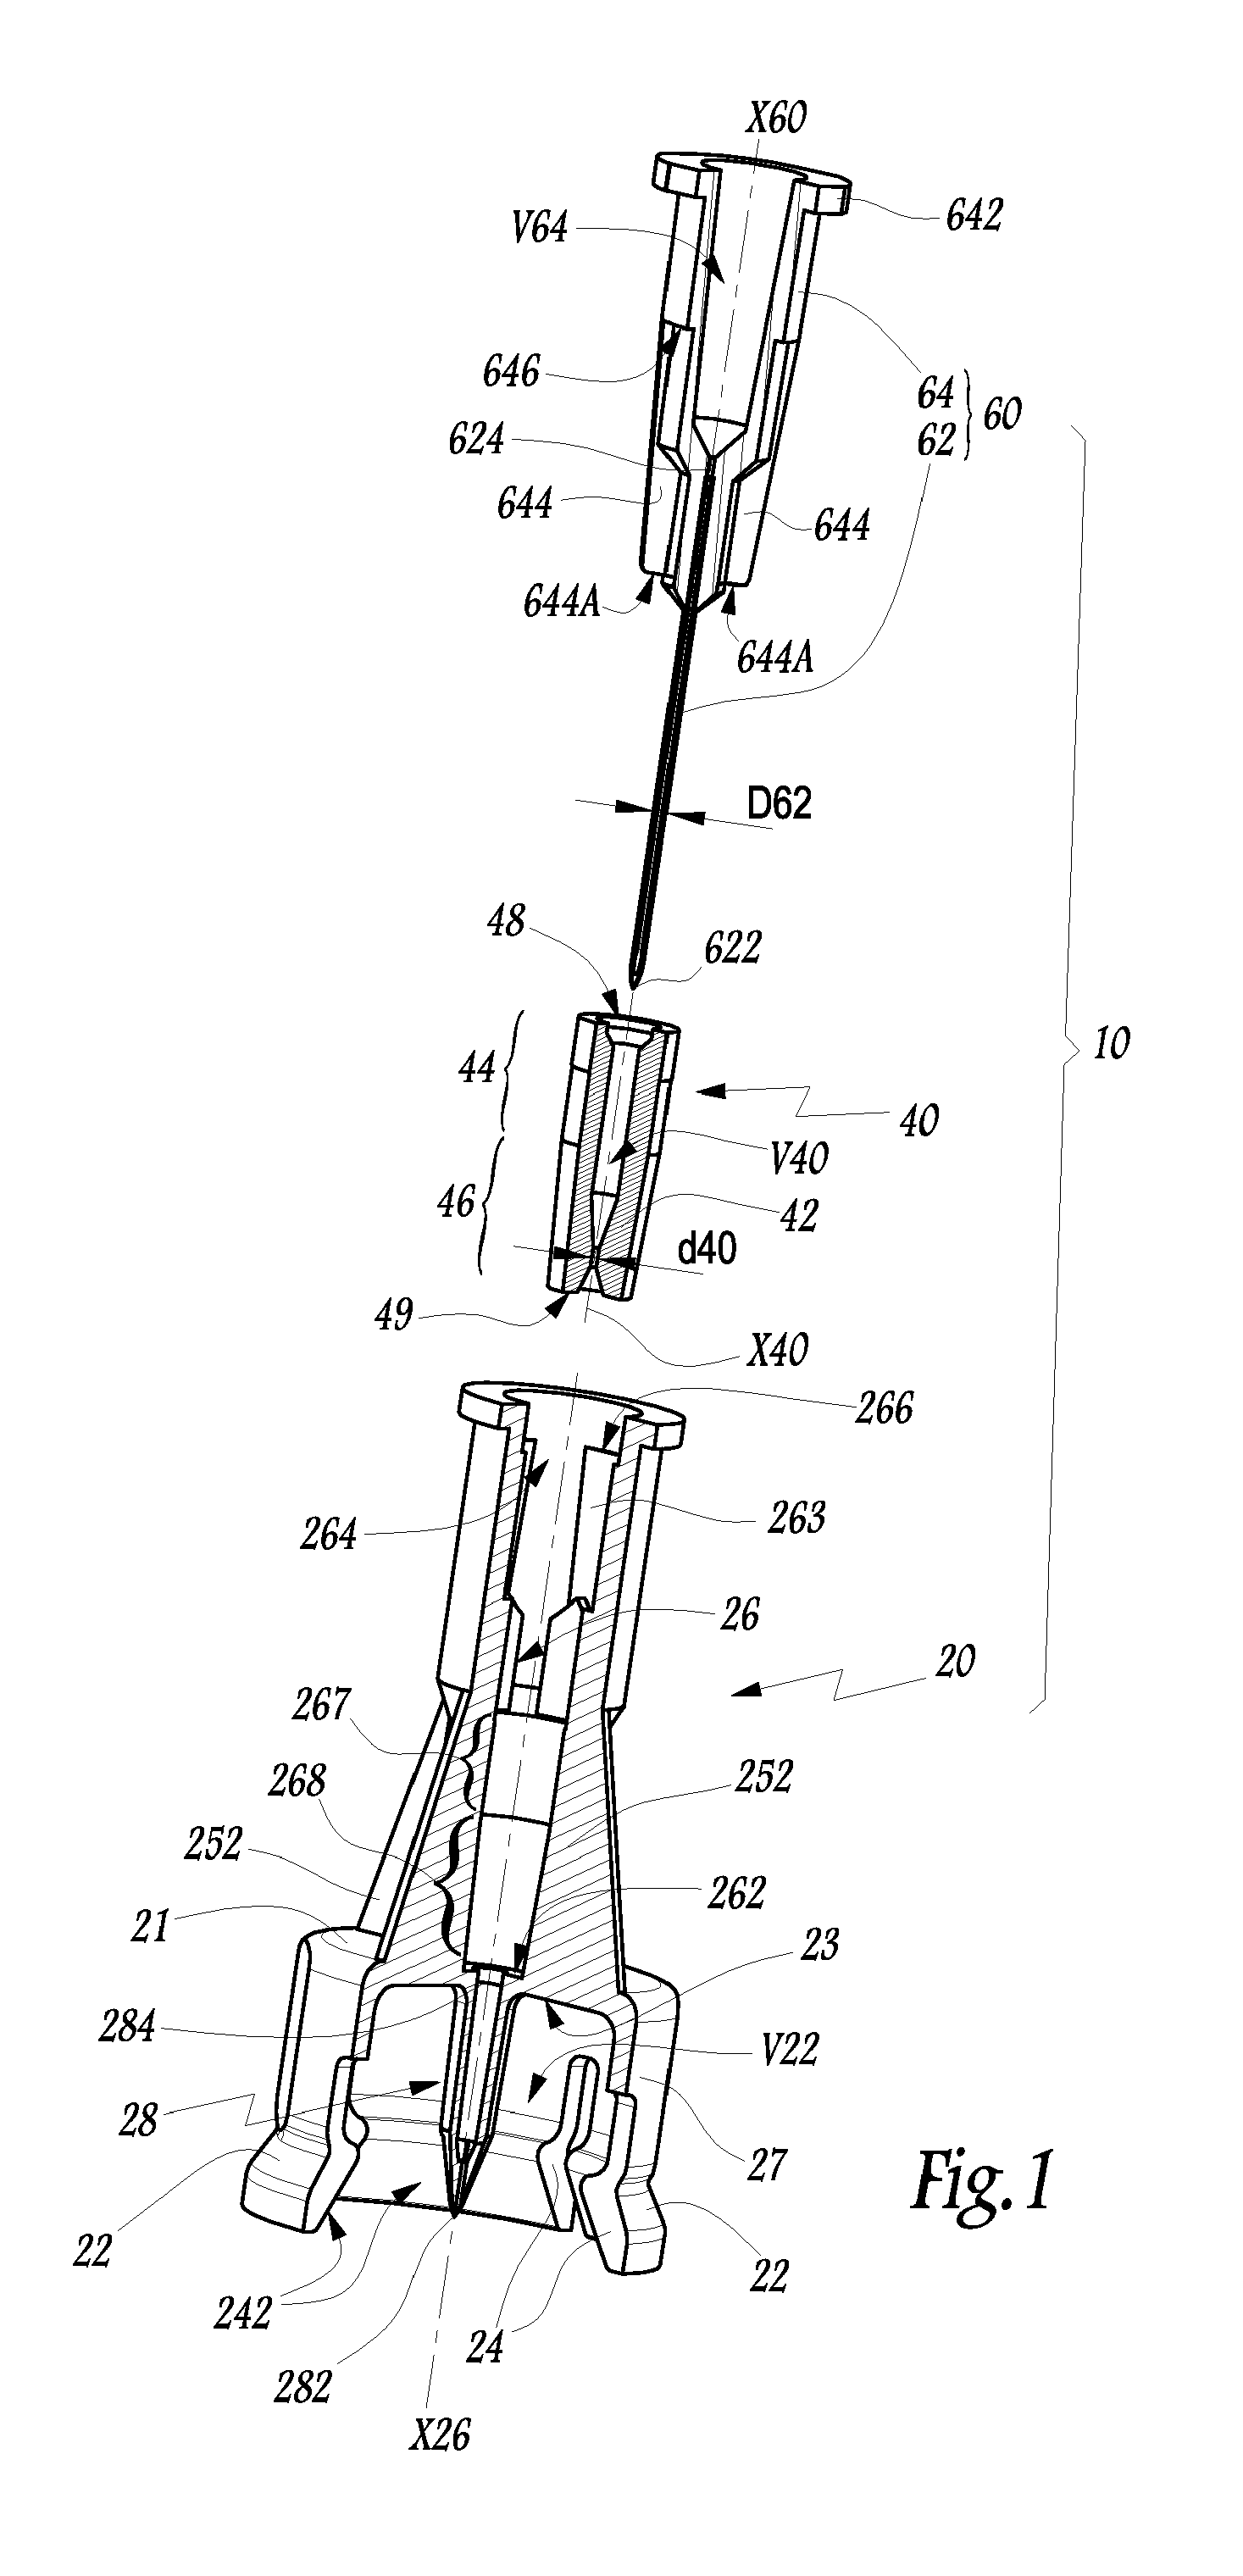 Device for connection between a recipient and a container and method for assembling and using such a device